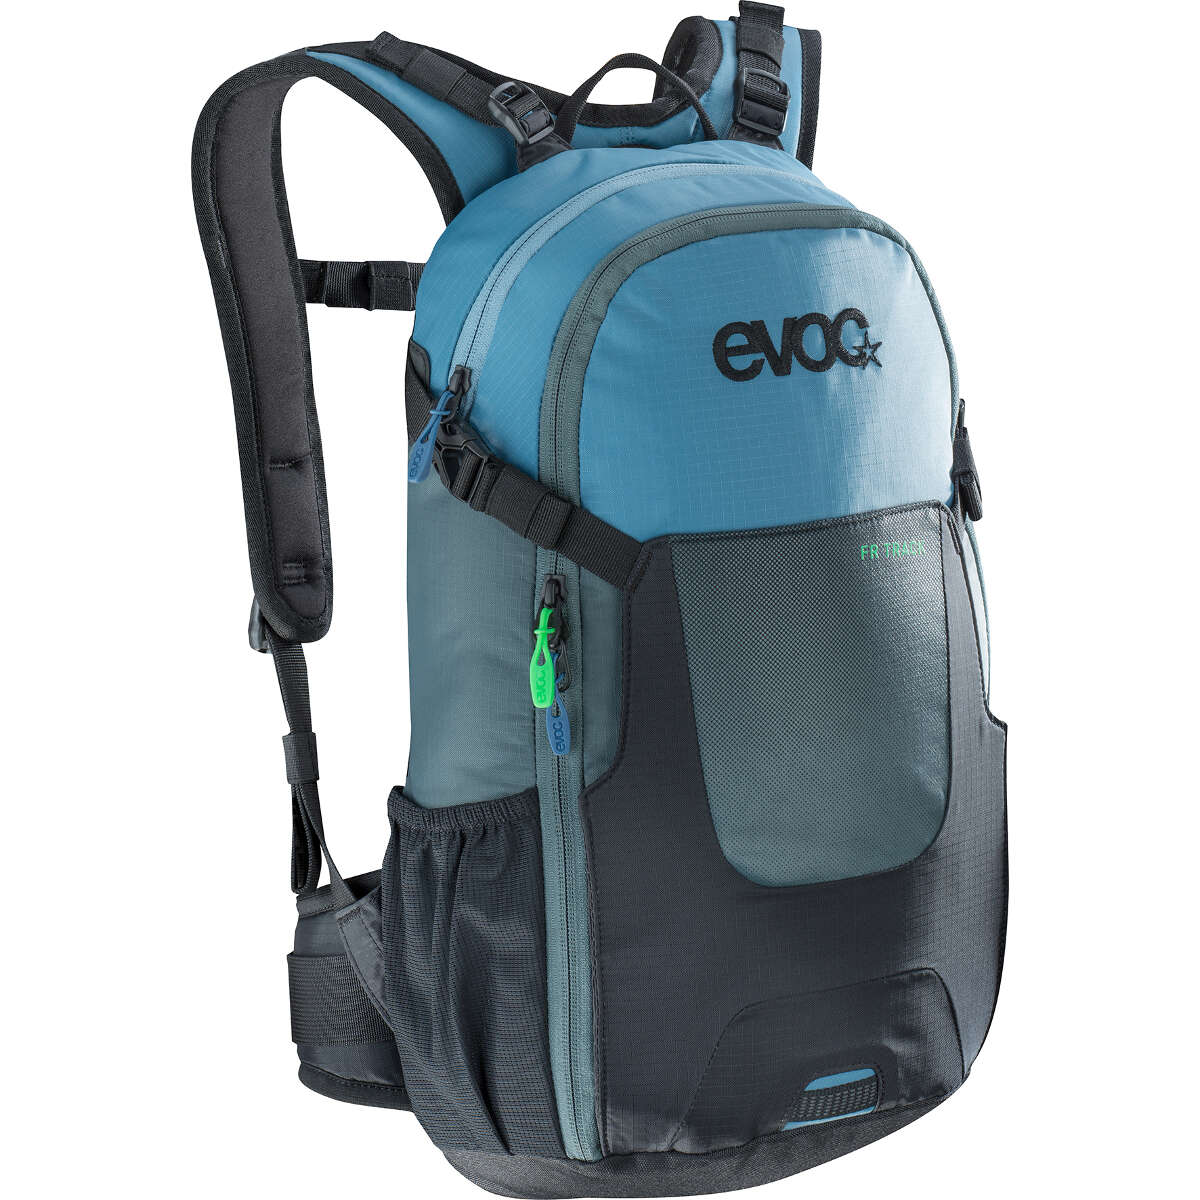 Evoc Protector Backpack with Hydration System Compartment FR Track Black/Slate/Copen Blue, 10 Liter